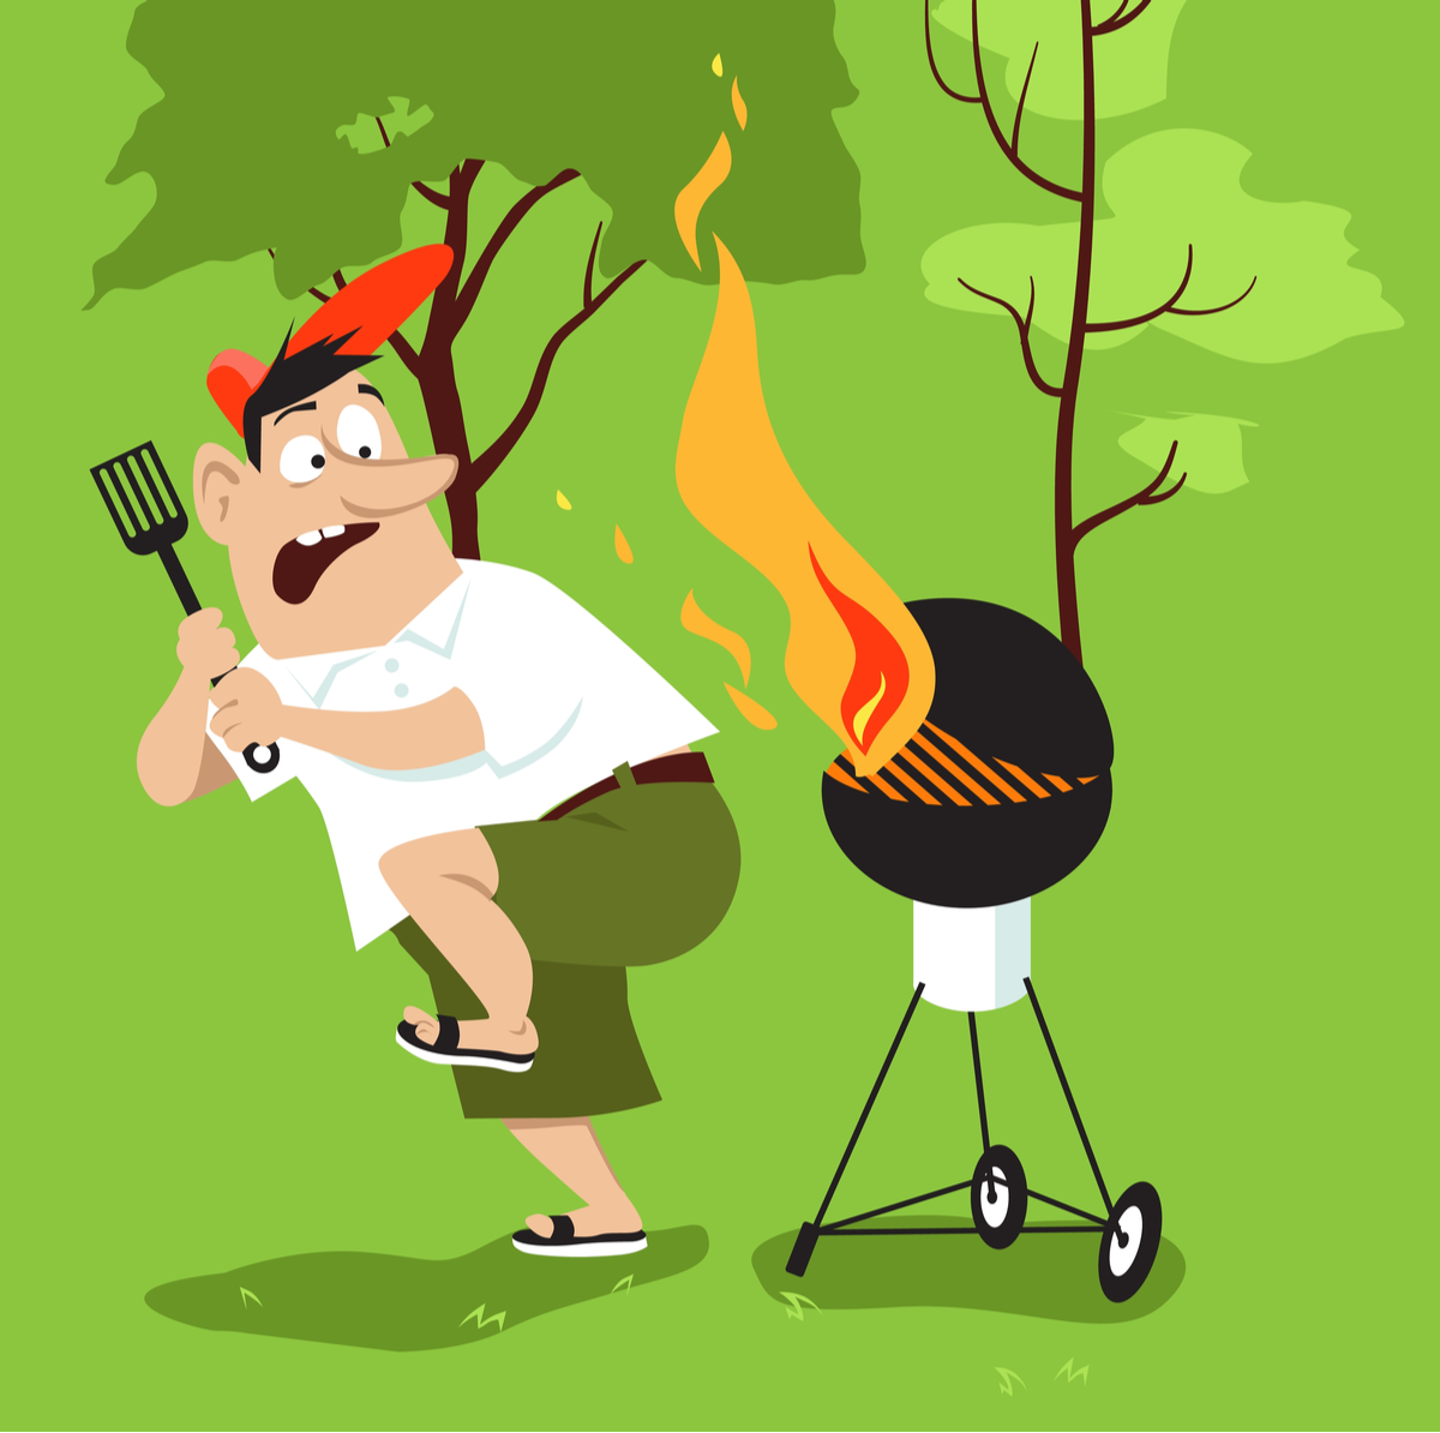 Man jumping from the grill with fire bursting out graphic